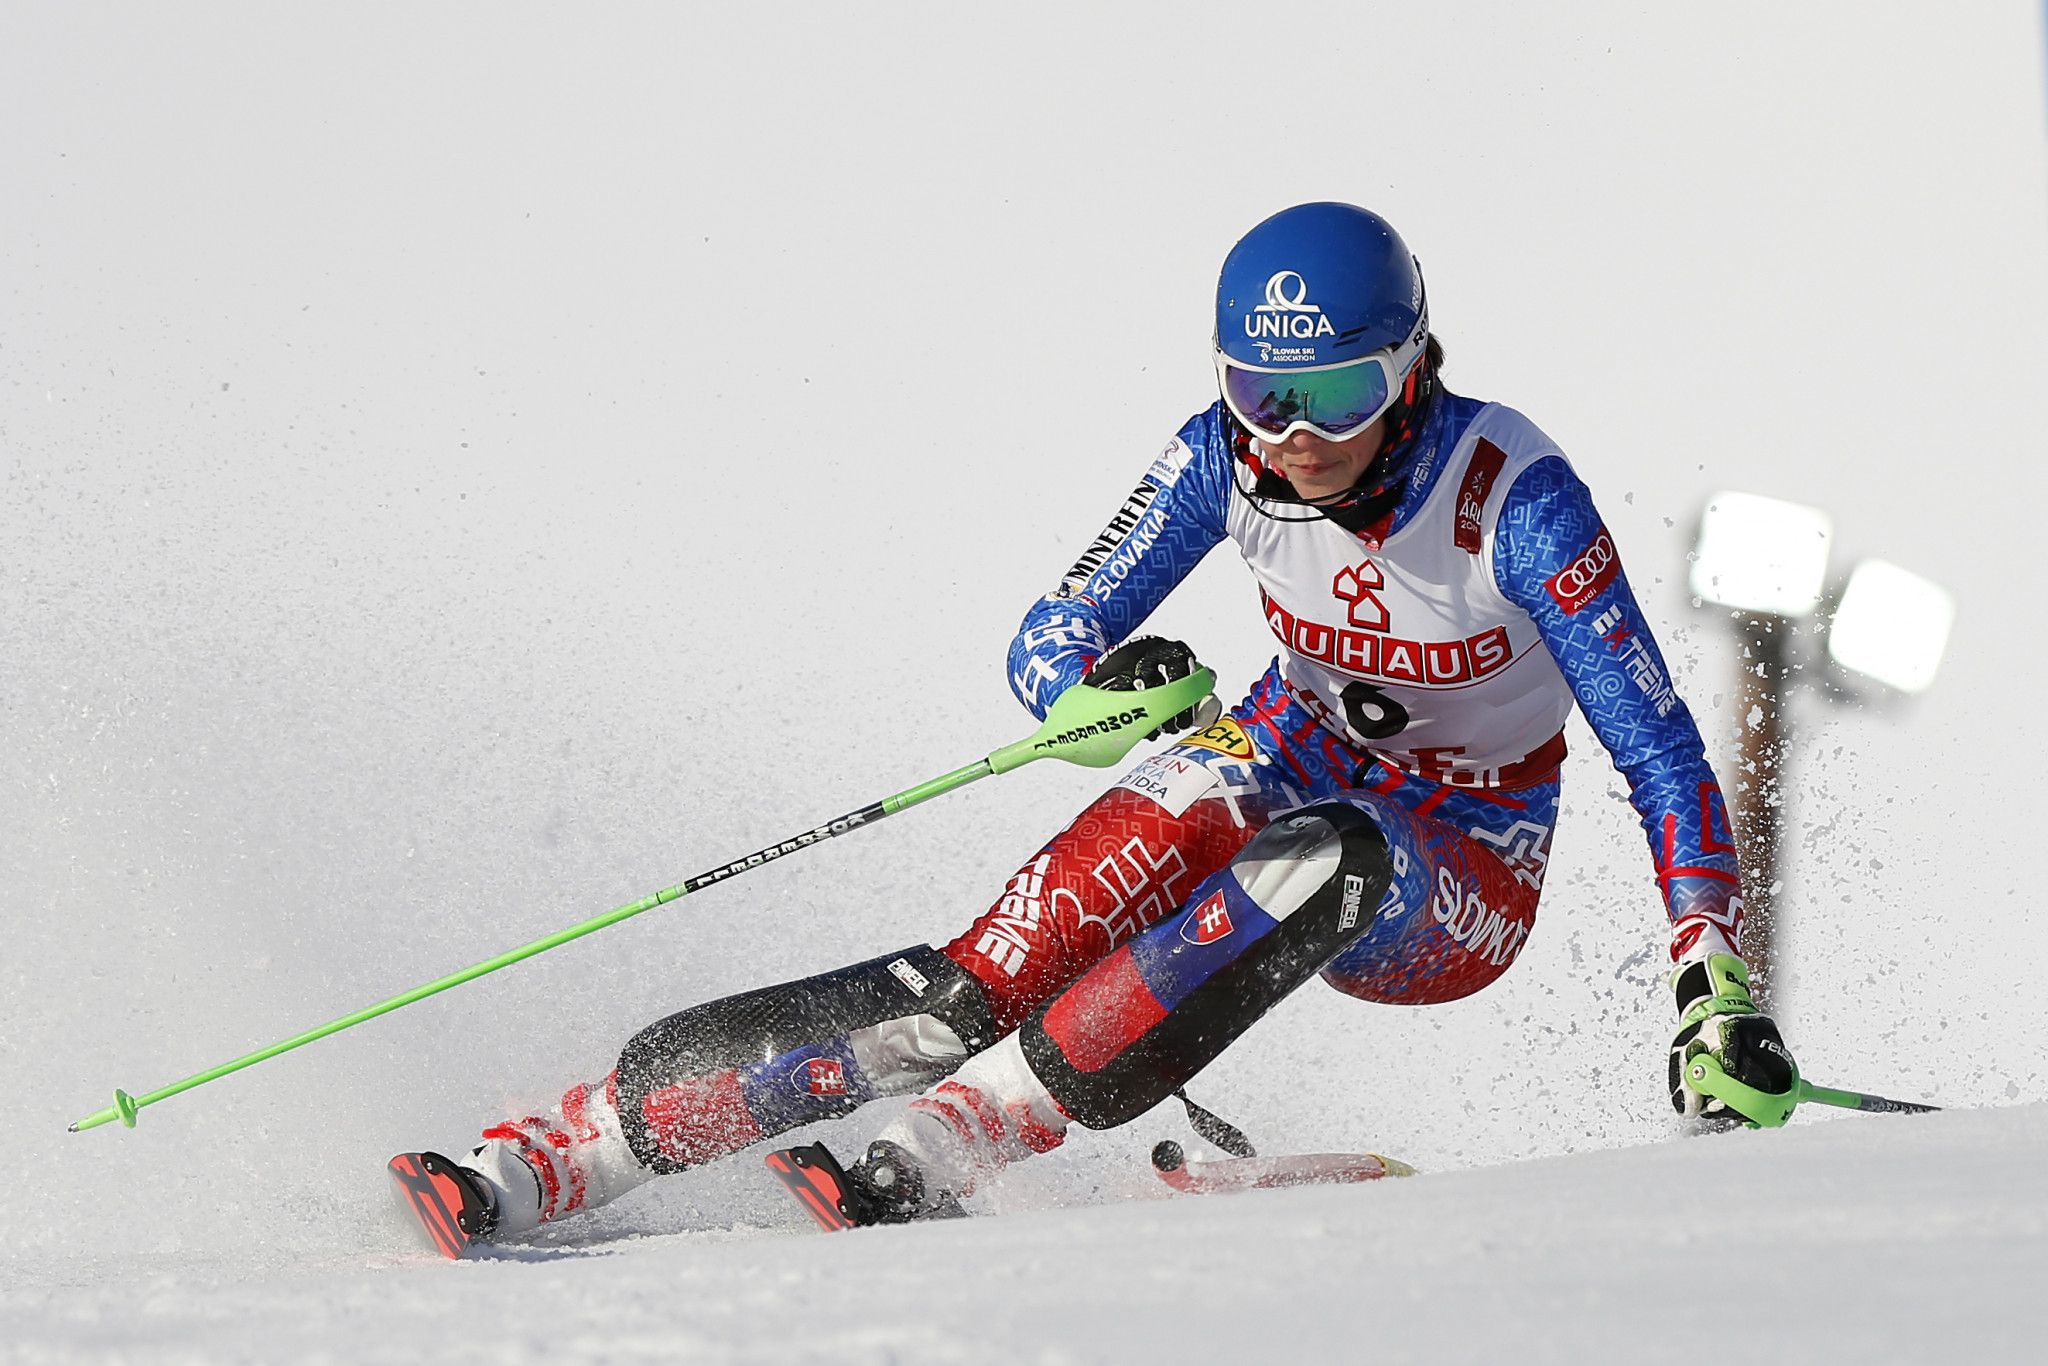 Giant slalom champion Petra Vlhová earned the bronze medal ©Getty Images